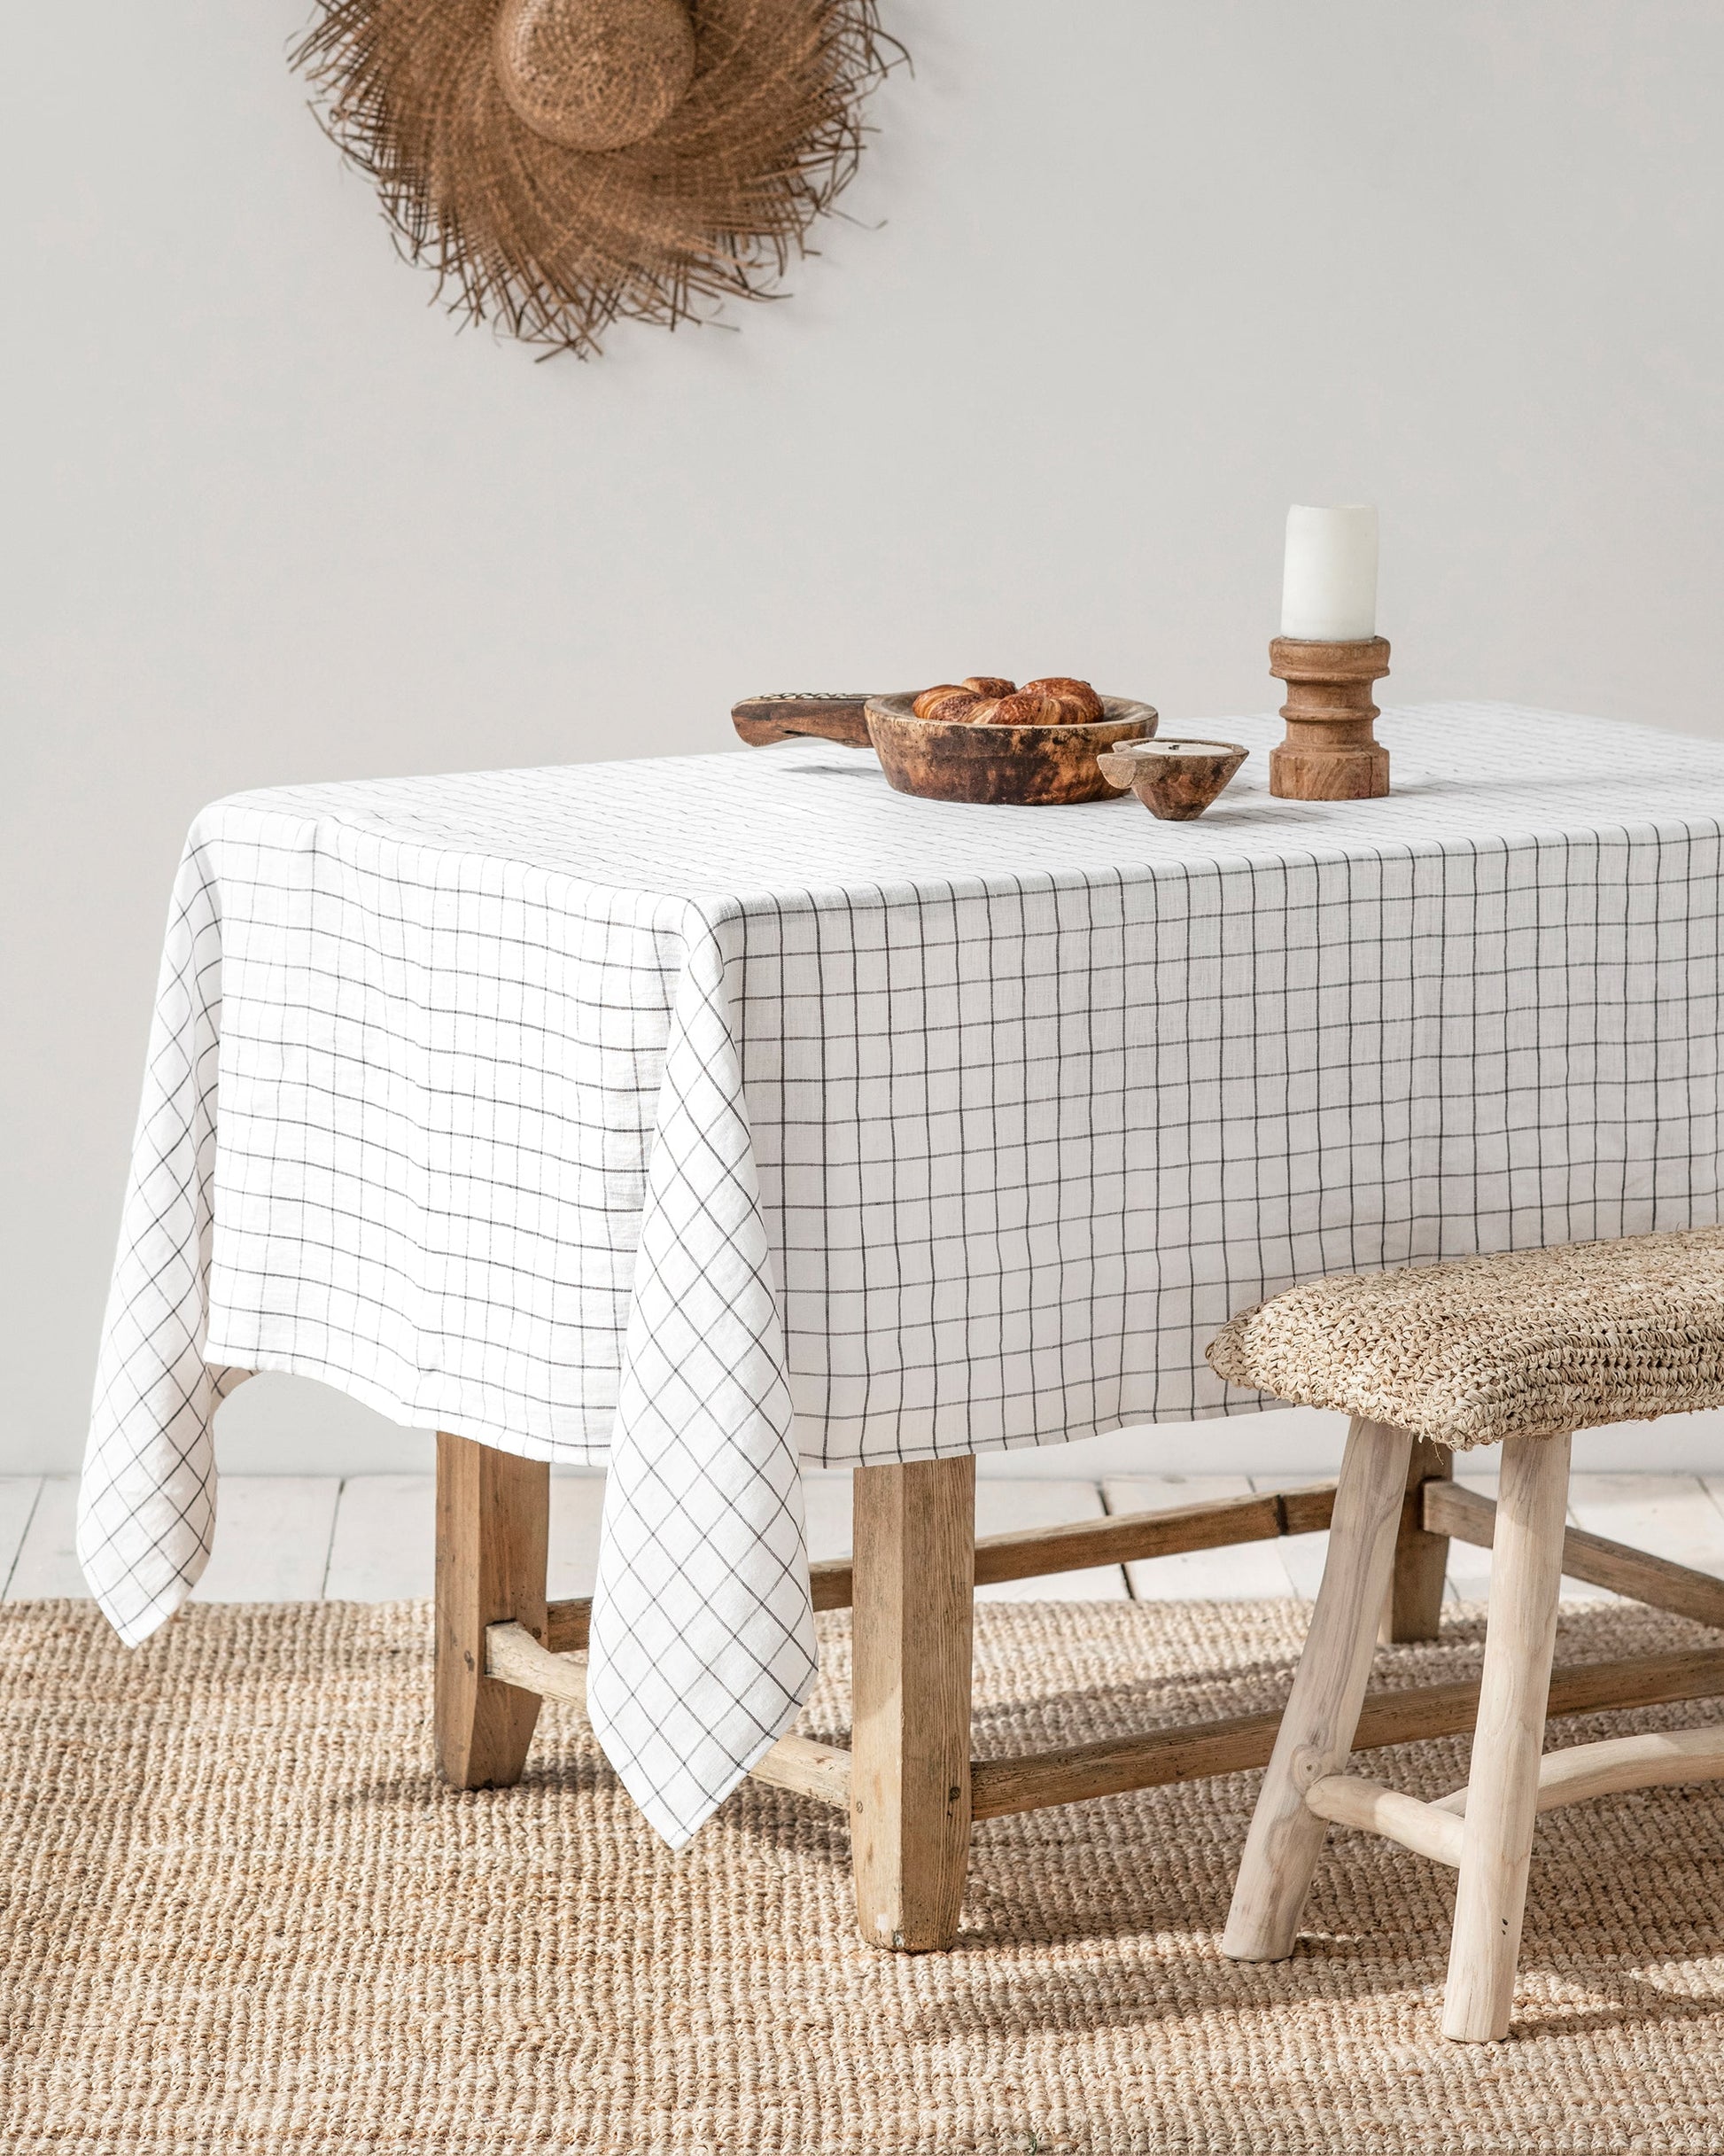 MagicLinen Linen Tablecloth in Grey 59” x 98” at Urban Outfitters